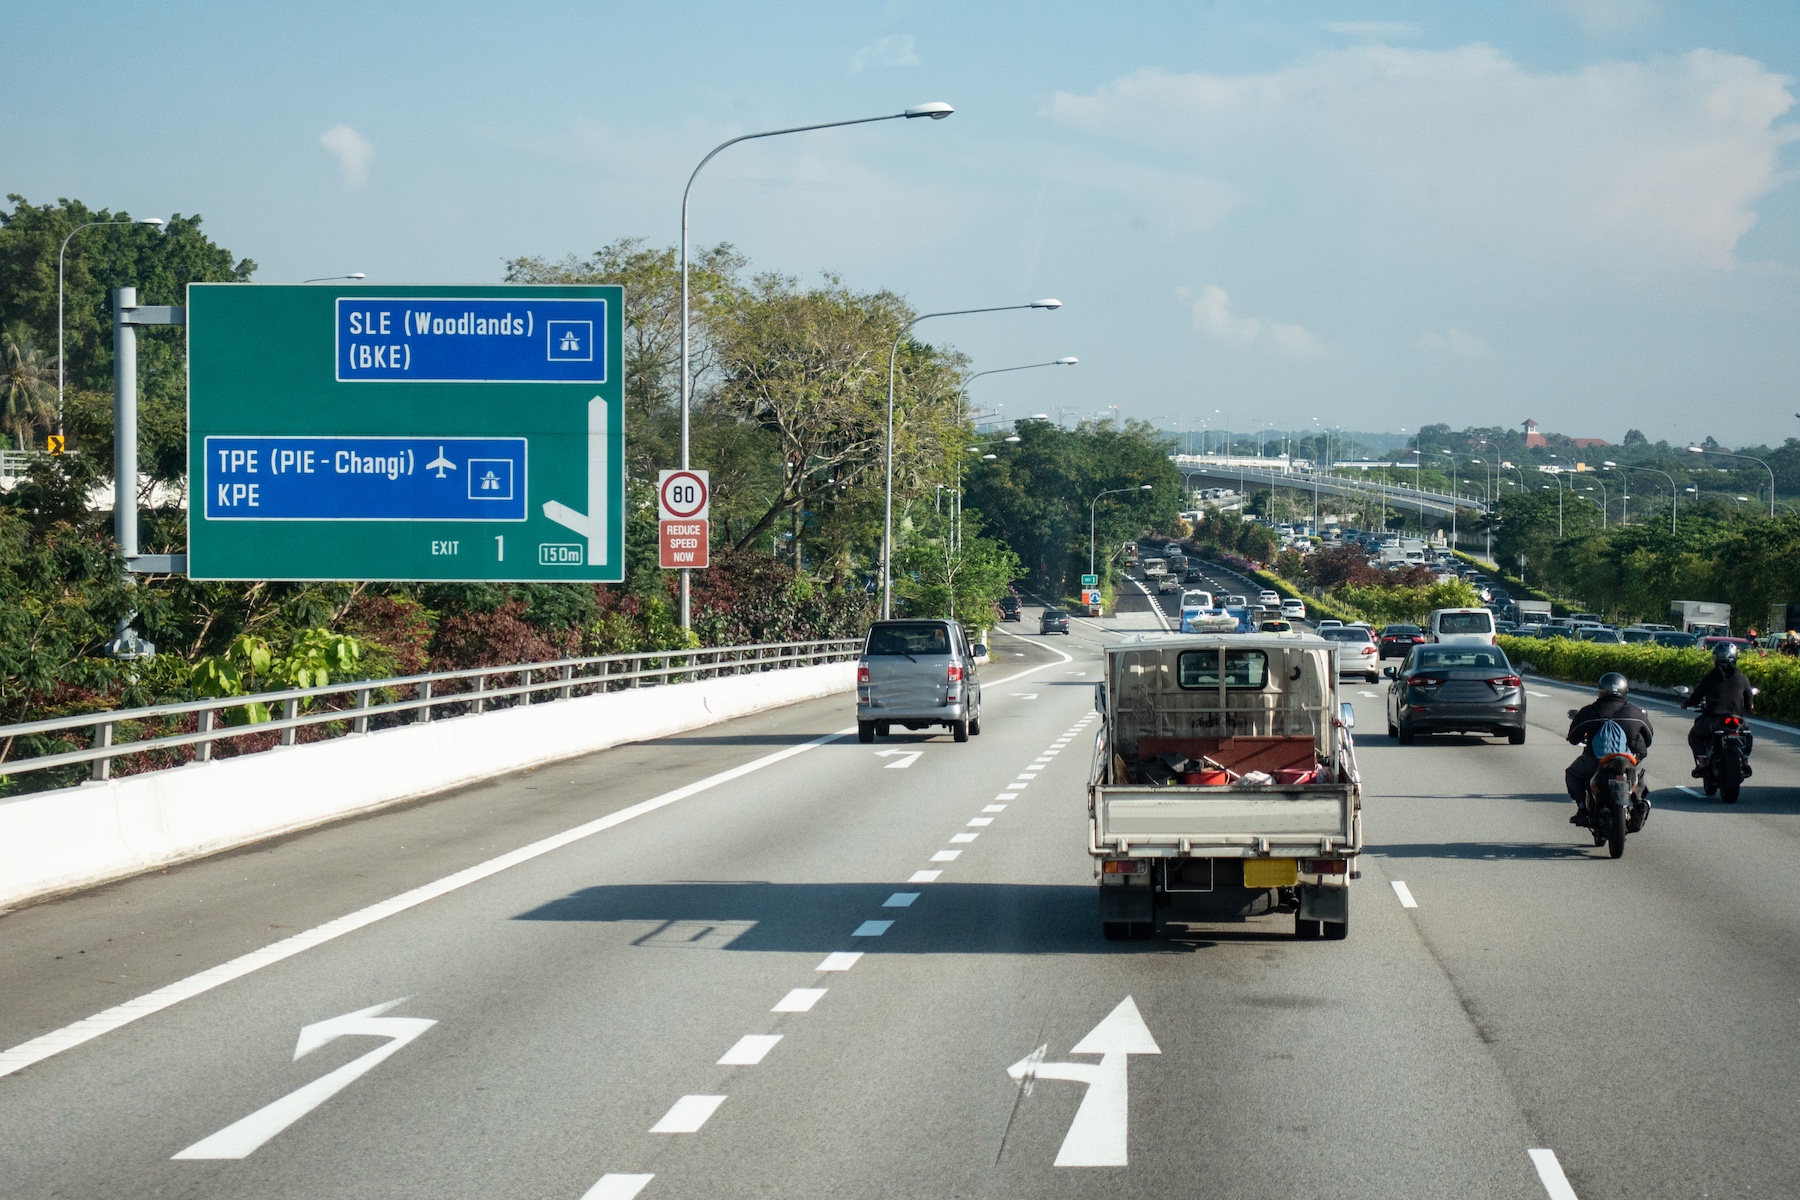 Singapore Central Expressway, Ang Mo Kio, Singapore. The right lanes are main lanes of highway, and the left way is to Changi Airport via TPE.

